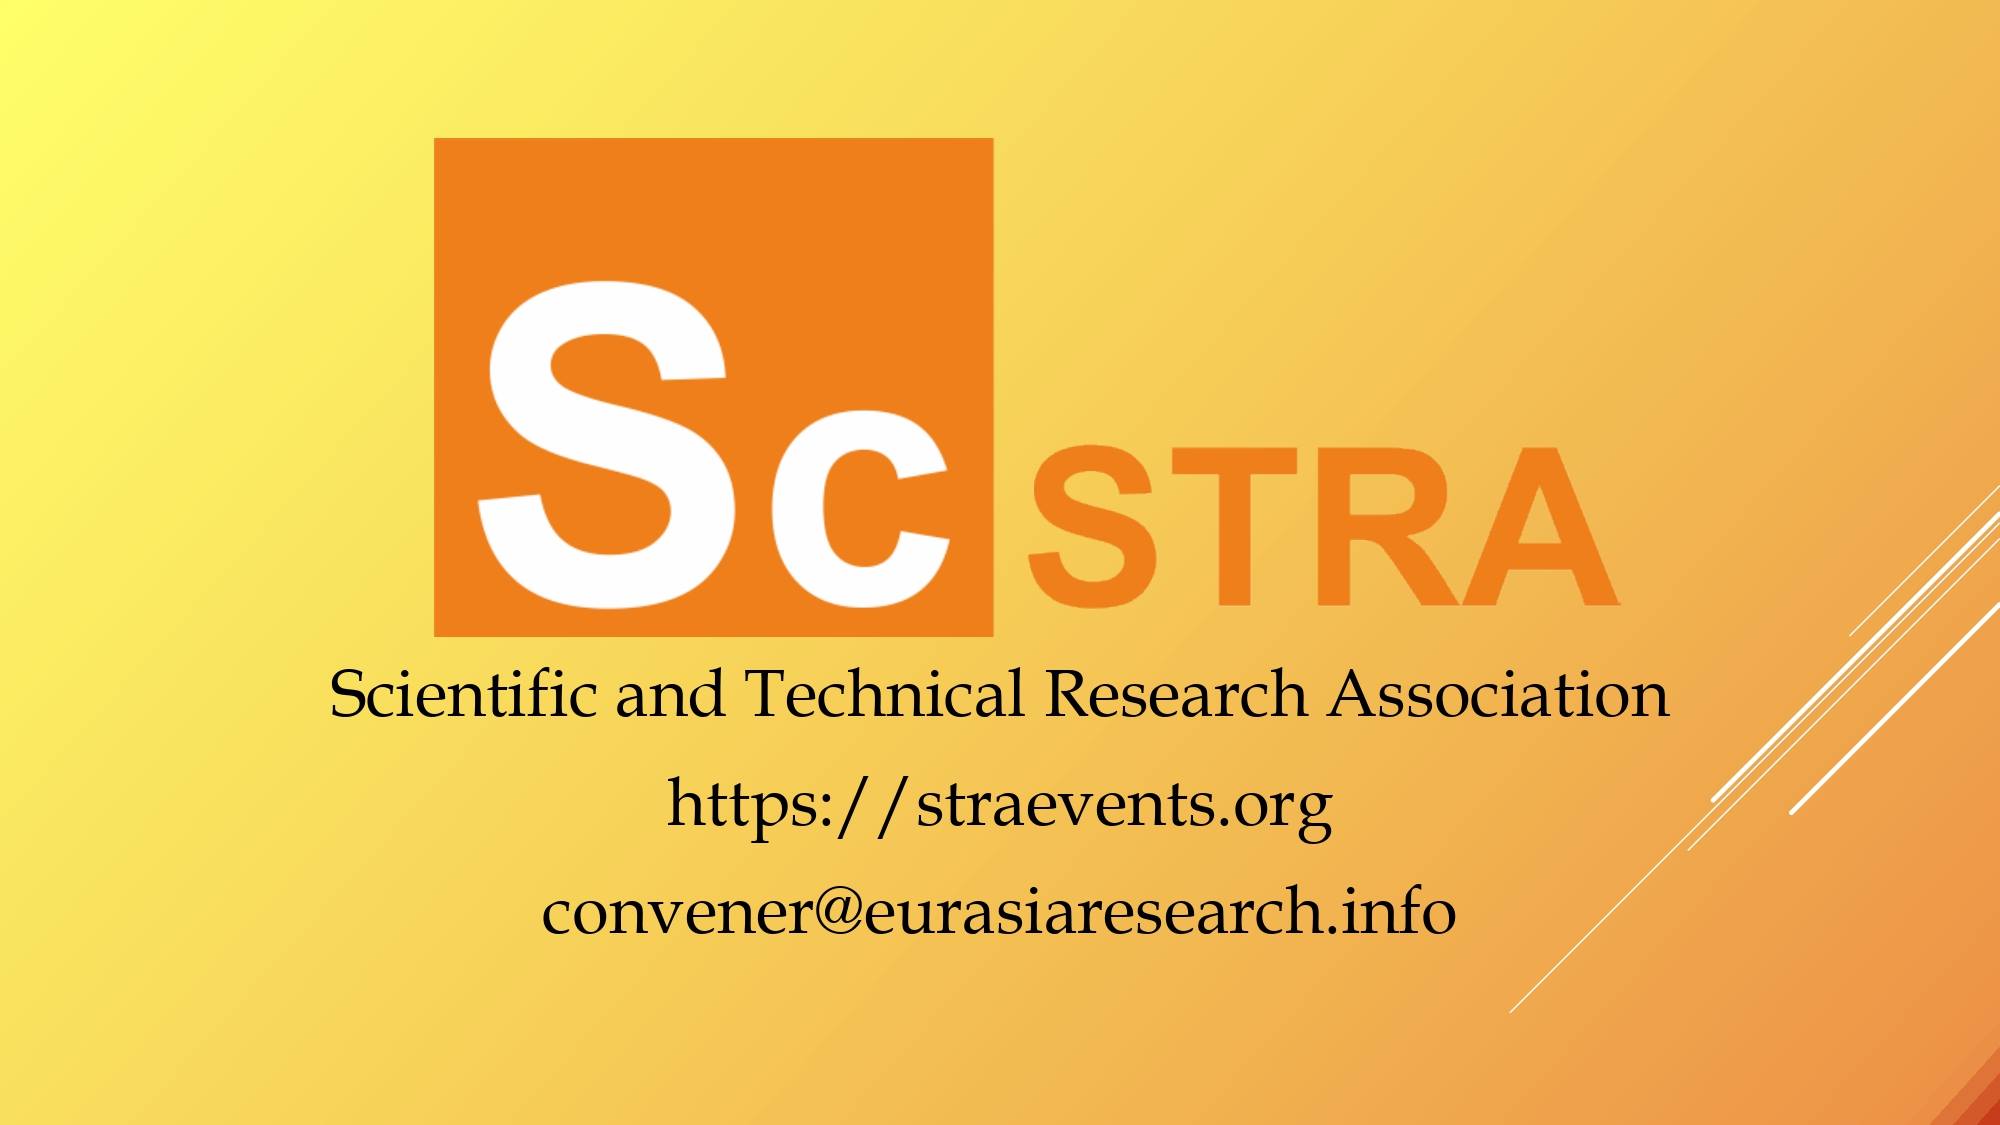 10th ICSTR London – International Conference on Science & Technology Research, 17-18 November 2022